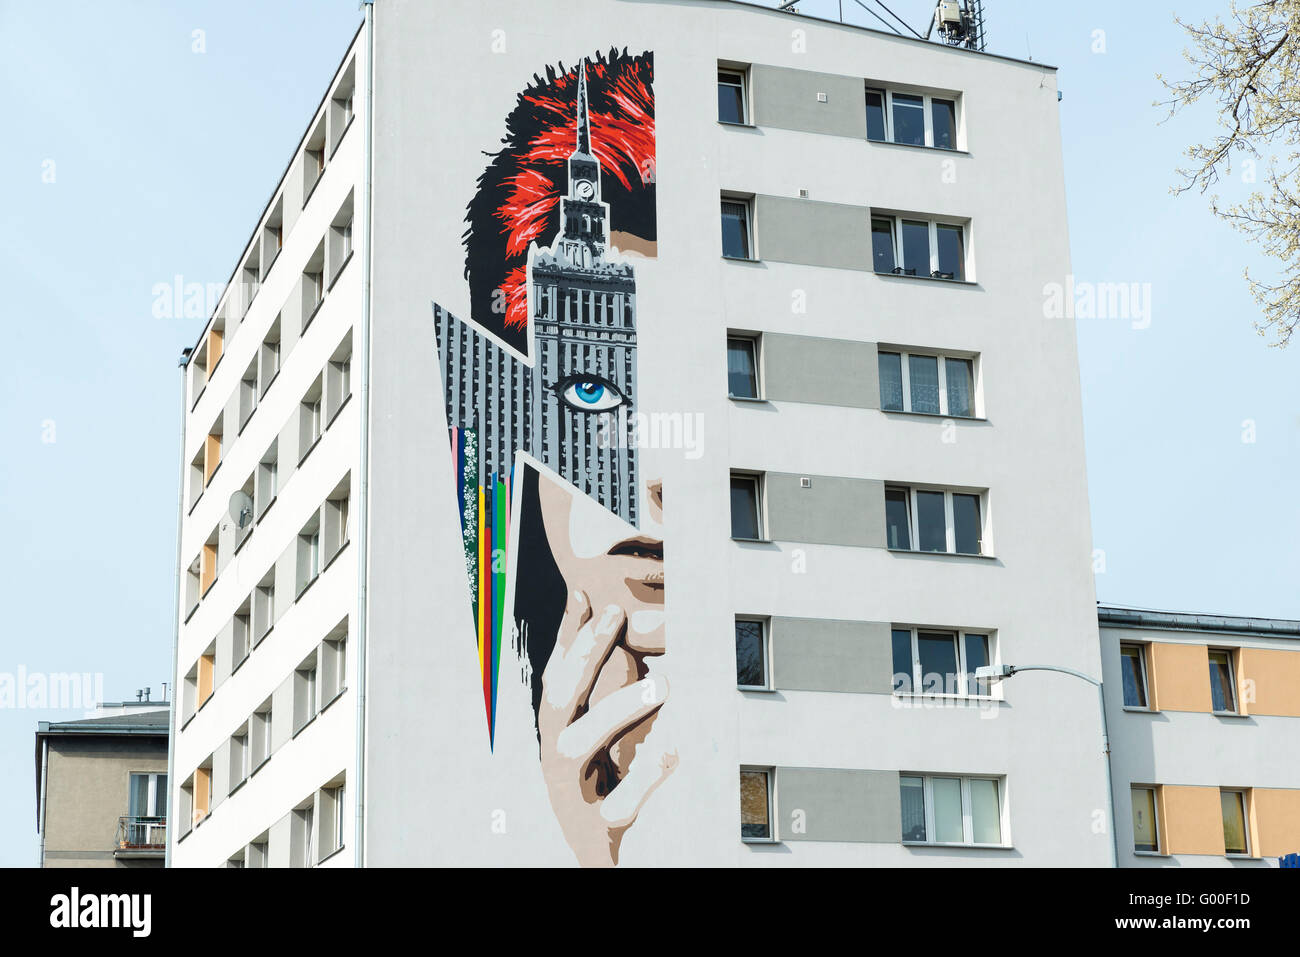 A mural portraying the late UK rock star David Bowie, Warsaw, Poland, Europe Stock Photo